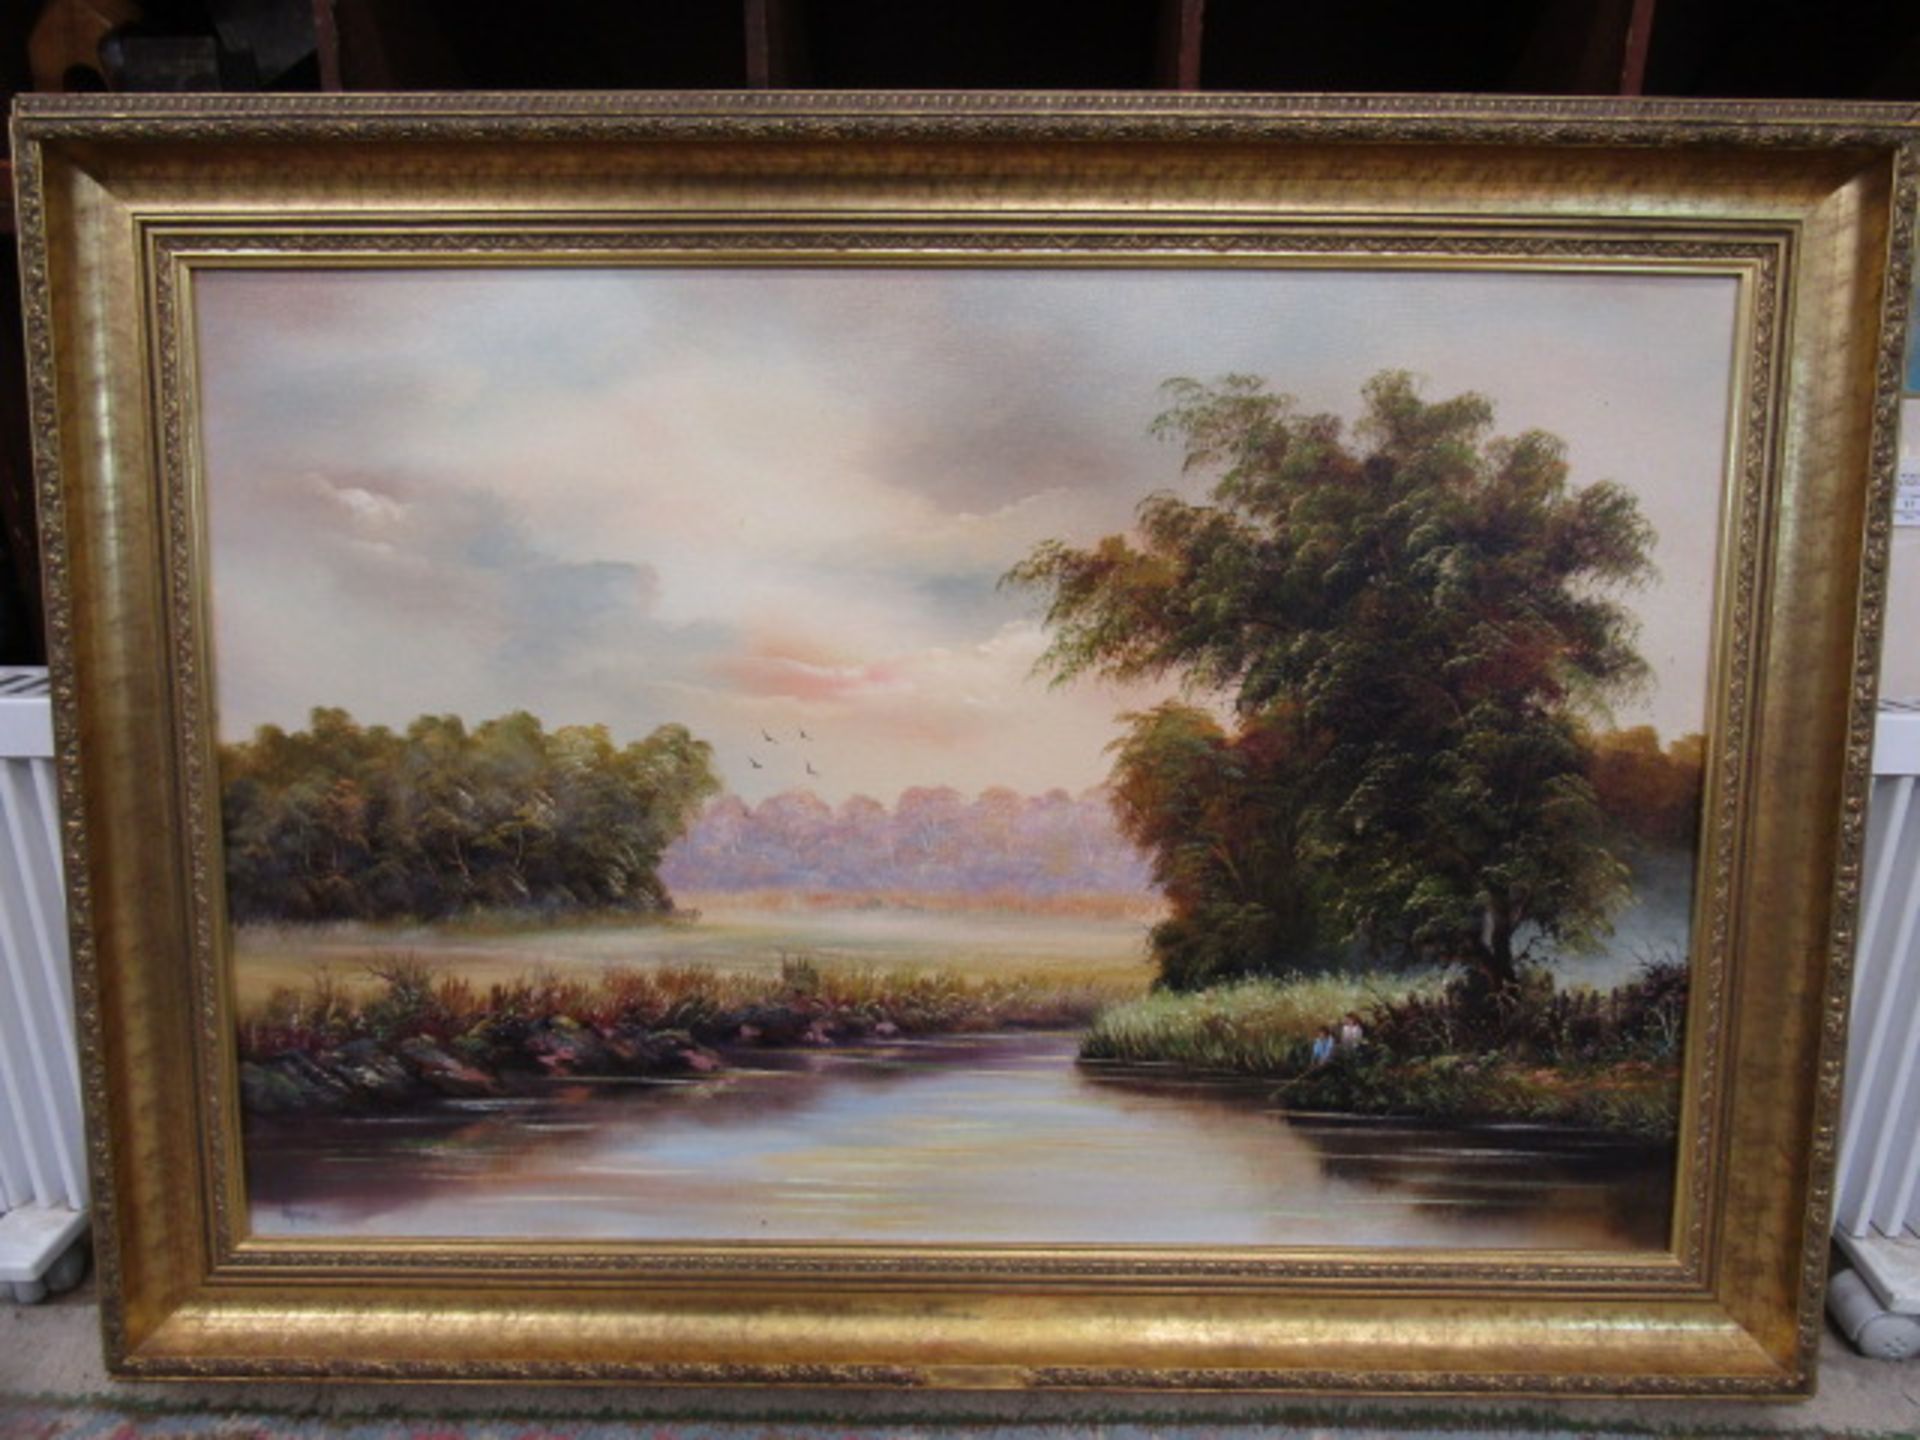 Anthony Cashman acrylic on canvas of a country river scene, actually signed by K. Hammond who held